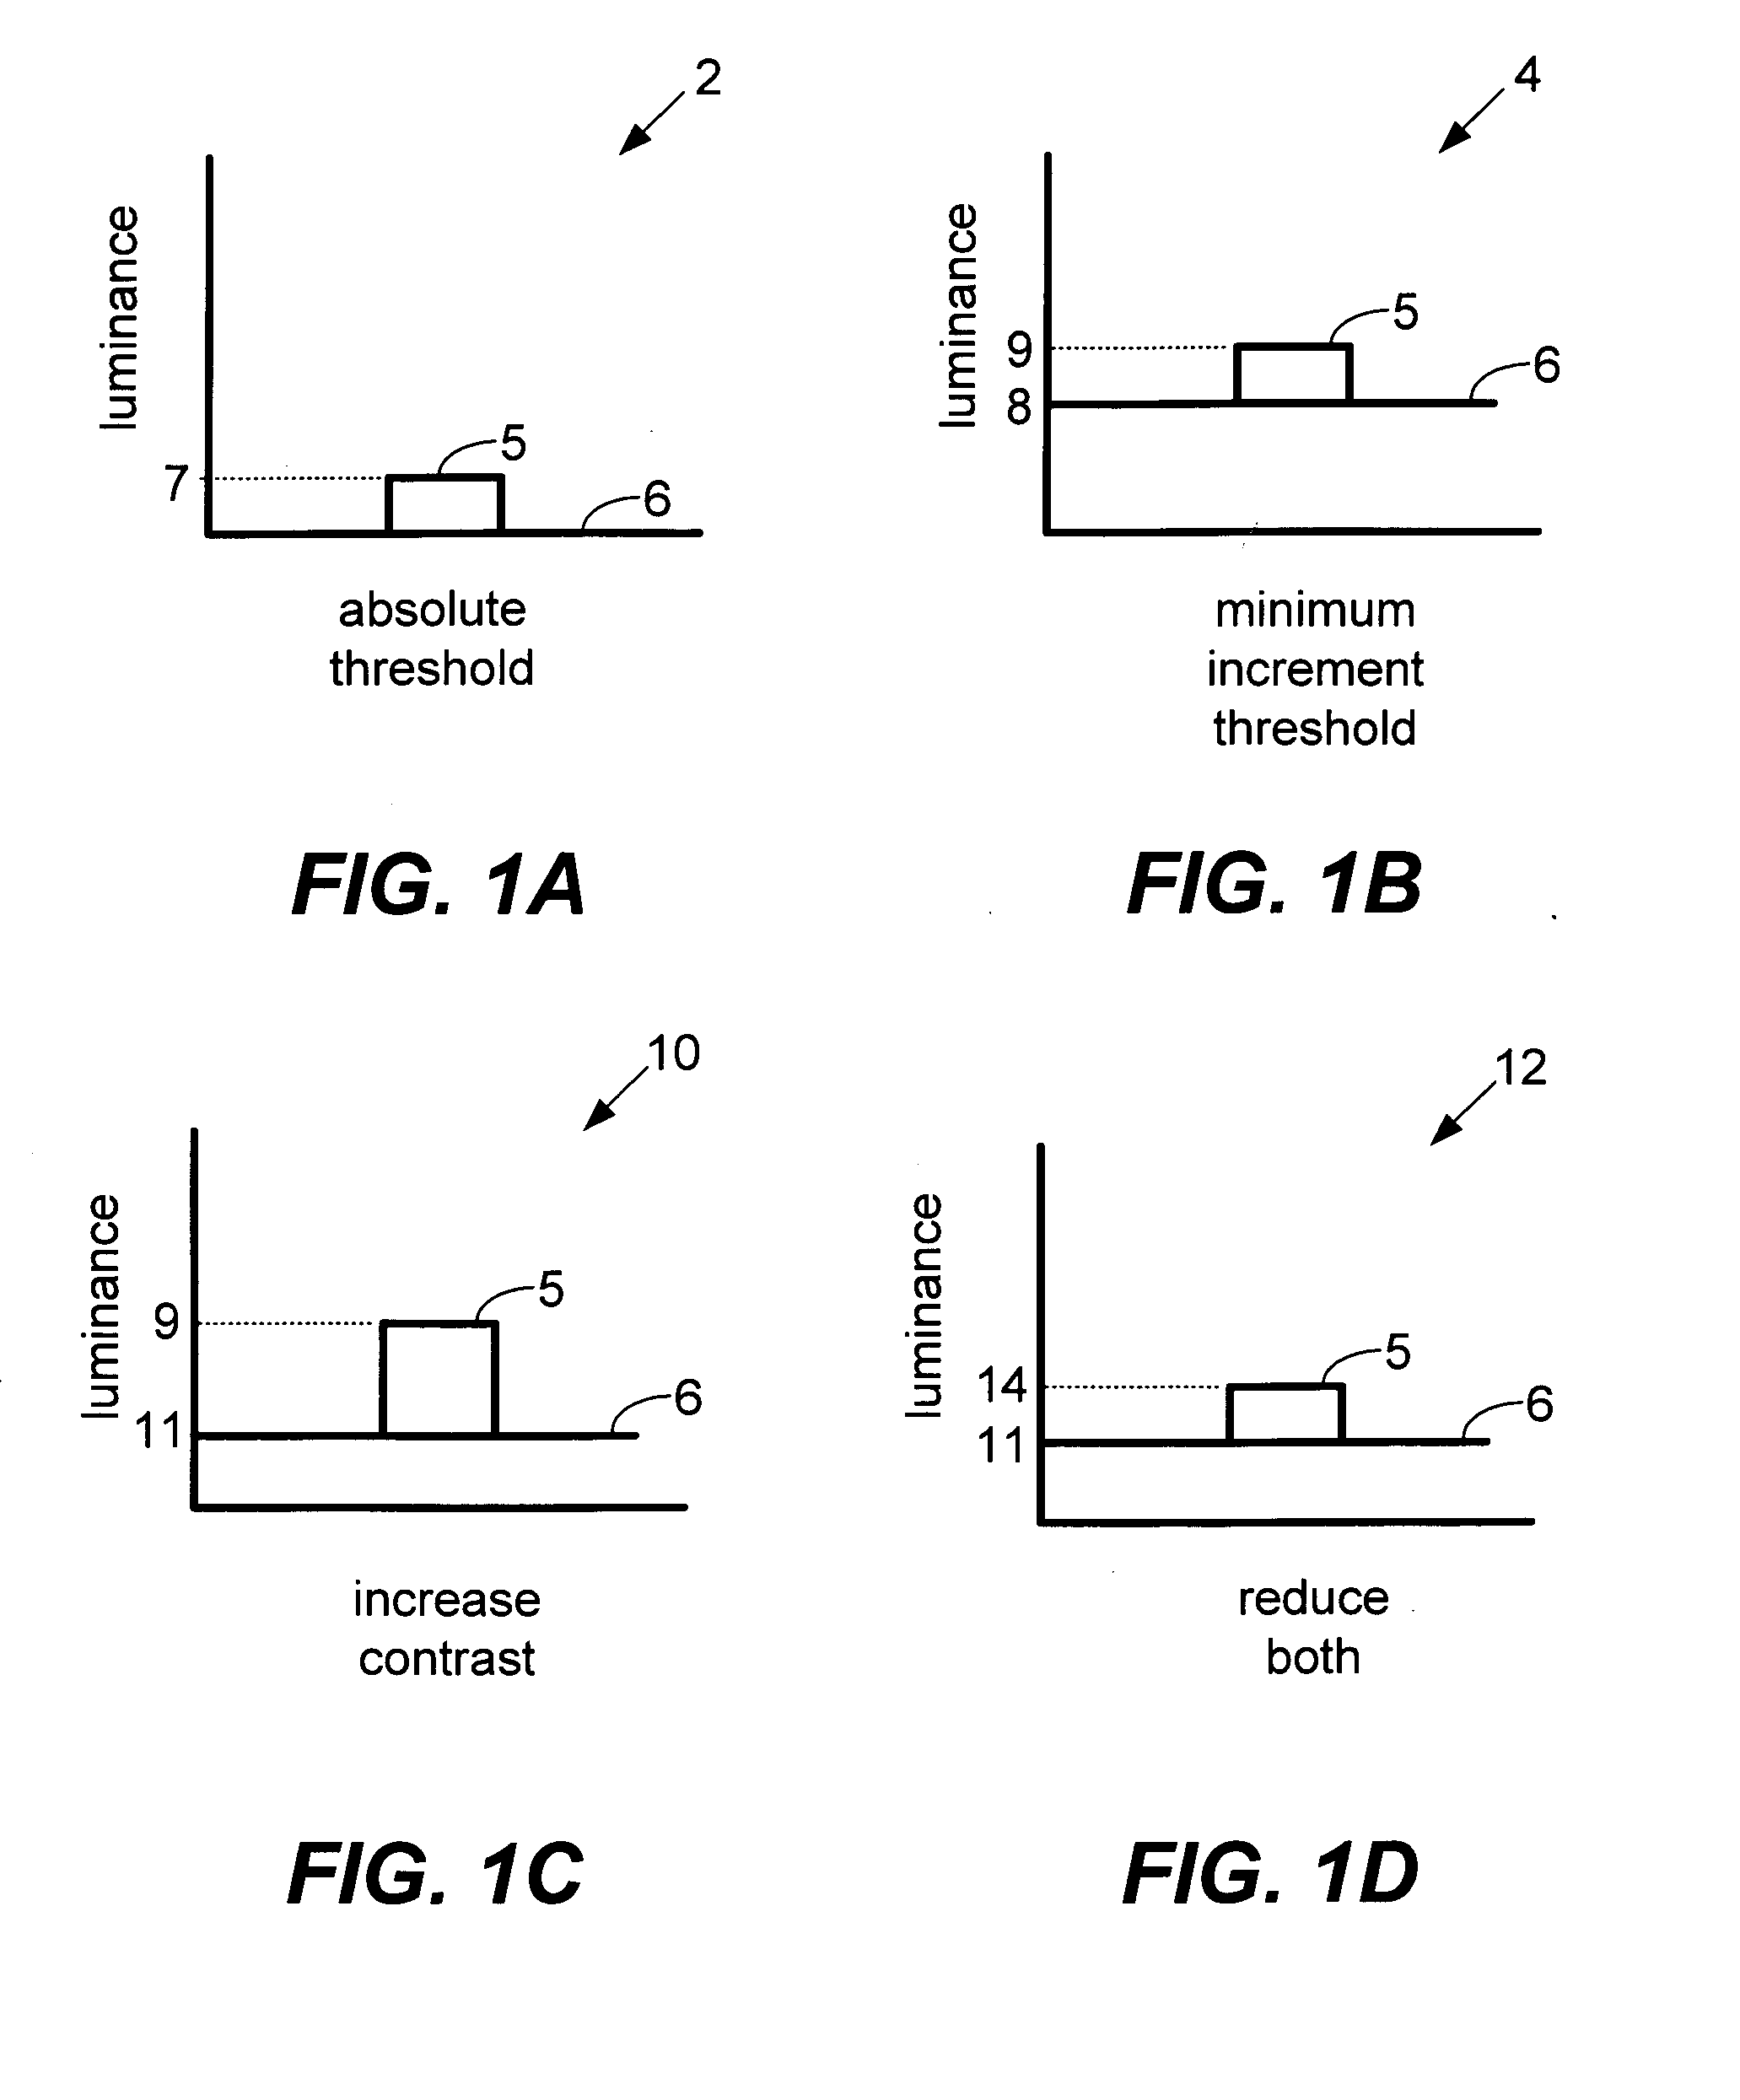 Background plateau manipulation for display device power conservation